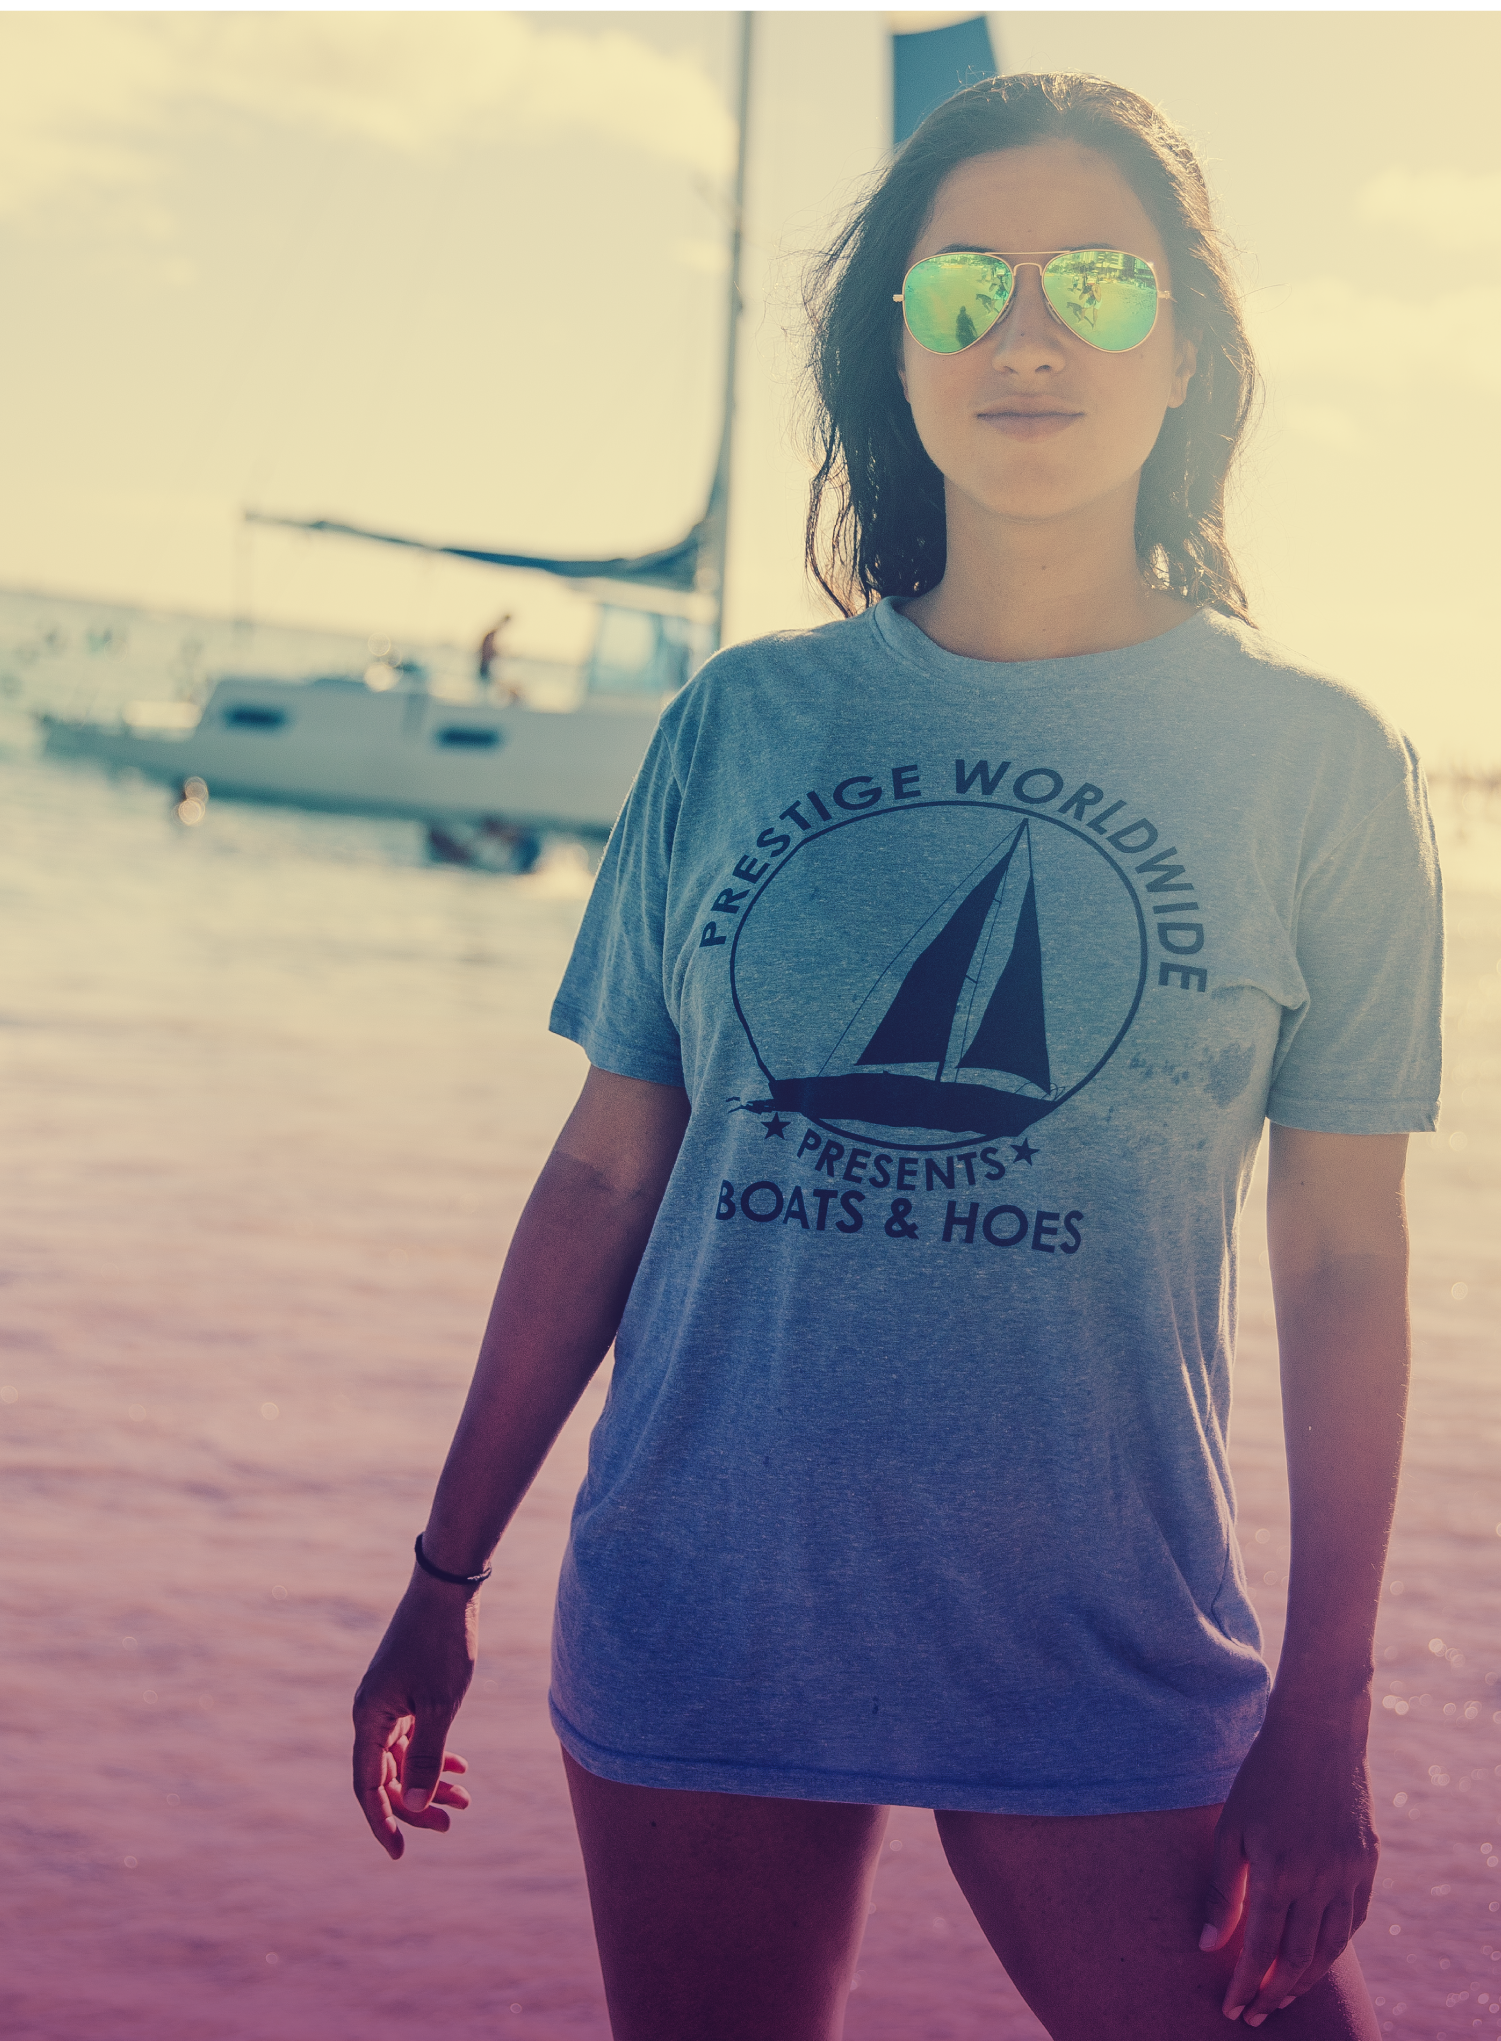 Woman with sunglasses wearing a prestige worldwide, boats & hoes, printed shirt